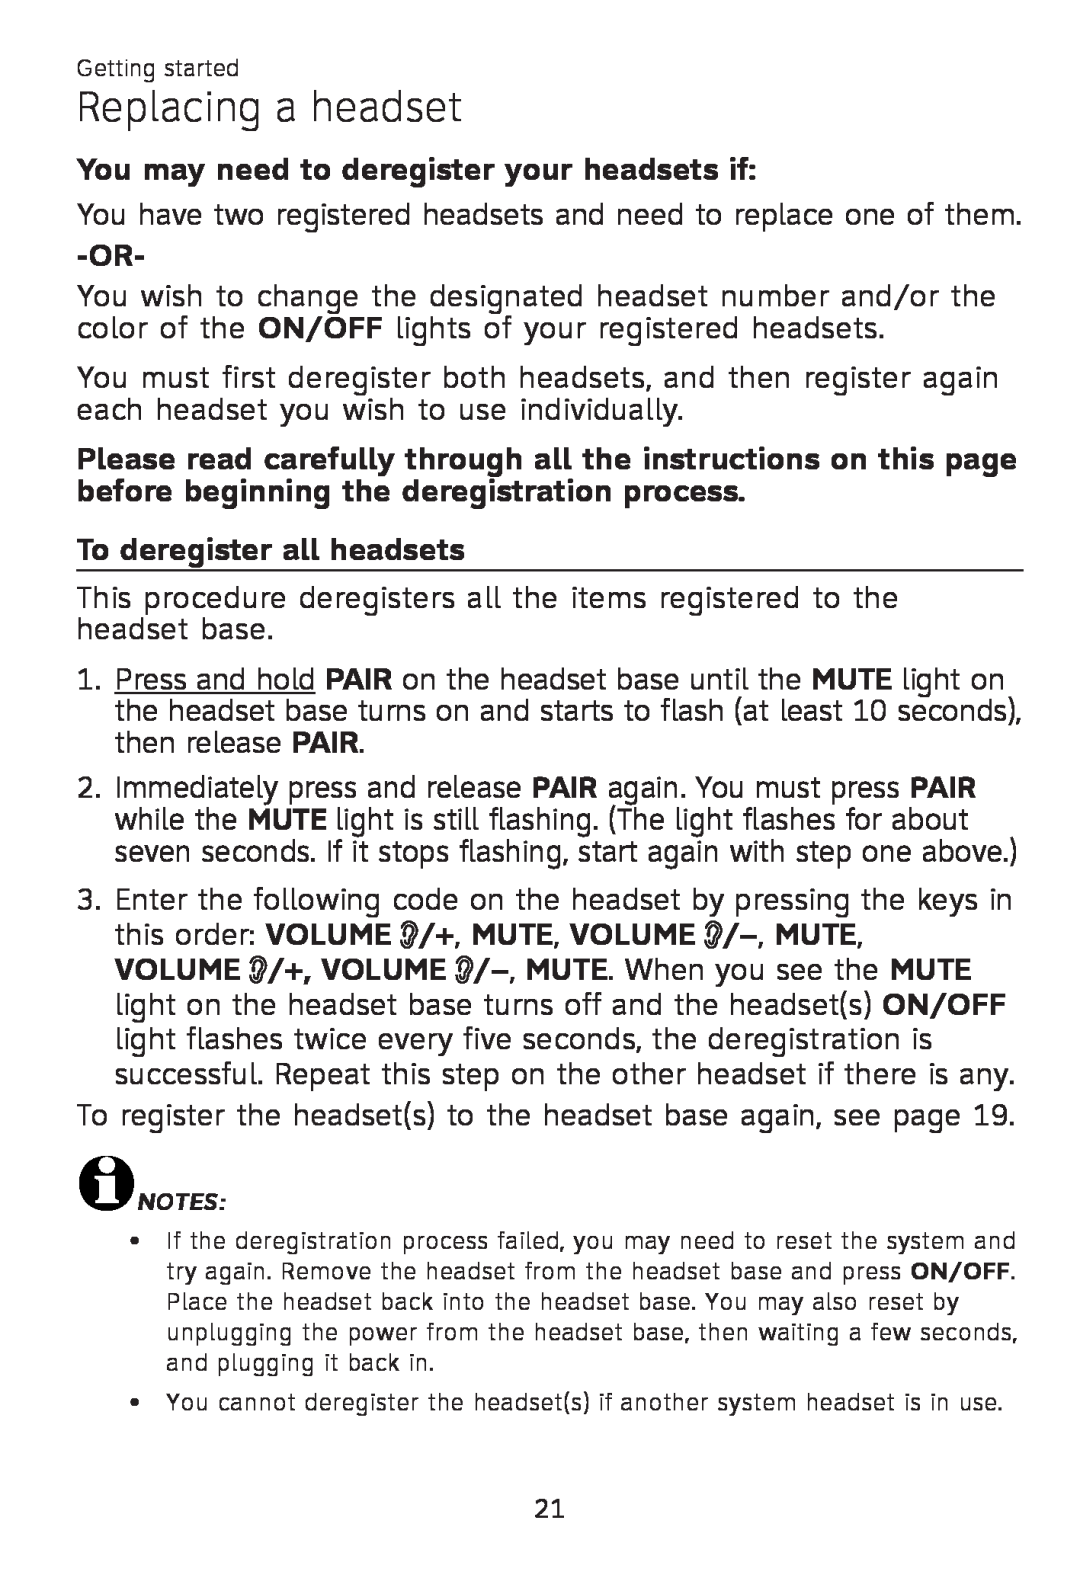 AT&T TL 7610 user manual Replacing a headset, You may need to deregister your headsets if, To deregister all headsets 